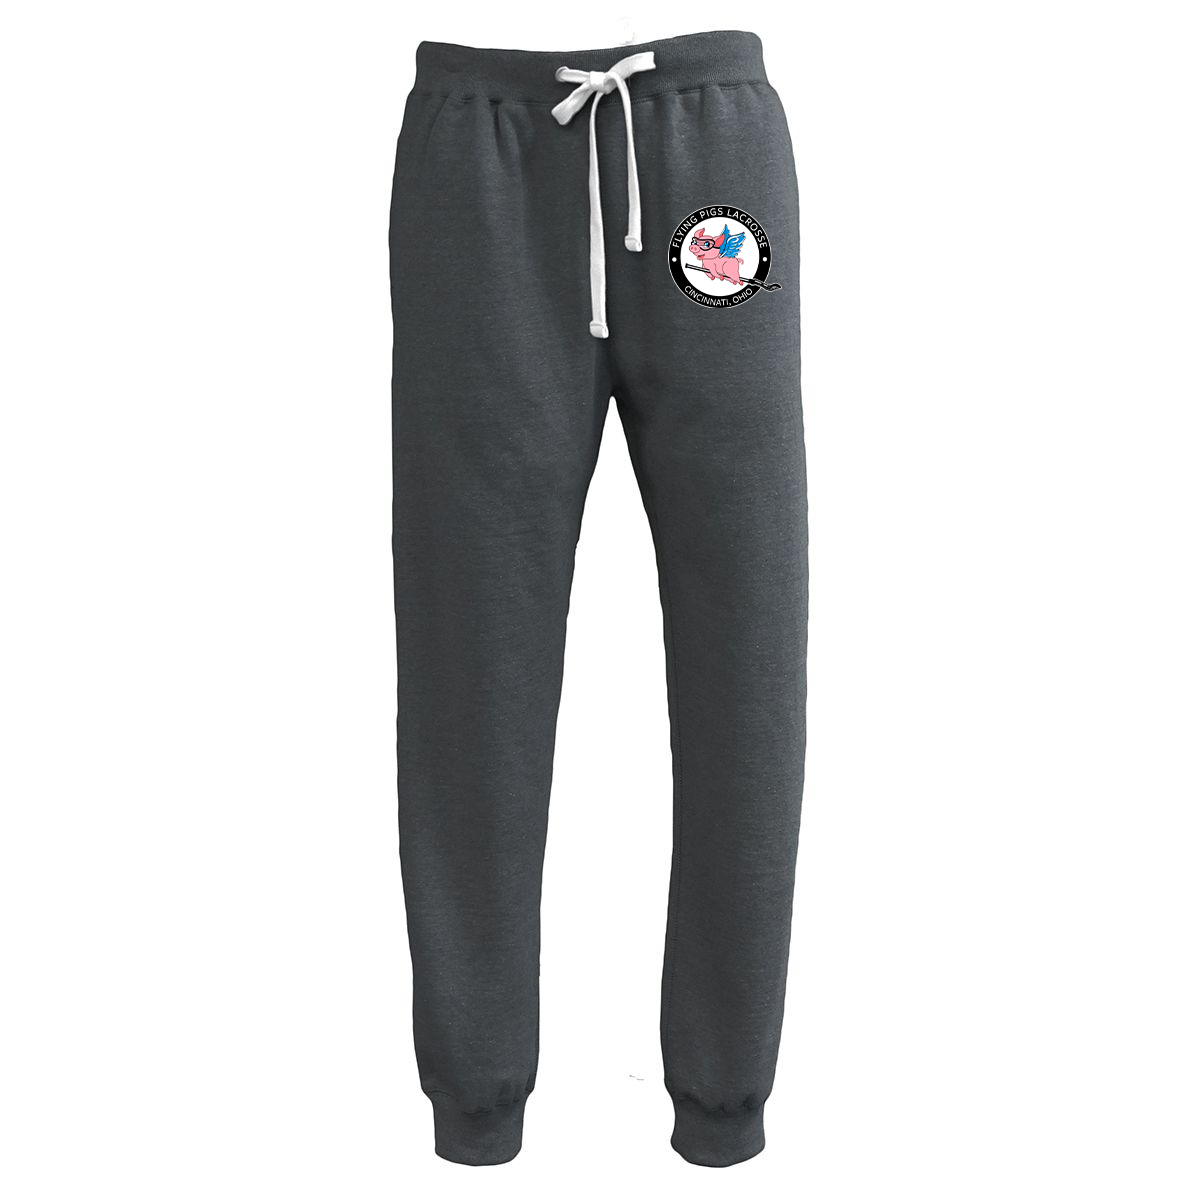 Flying Pigs Lacrosse Joggers